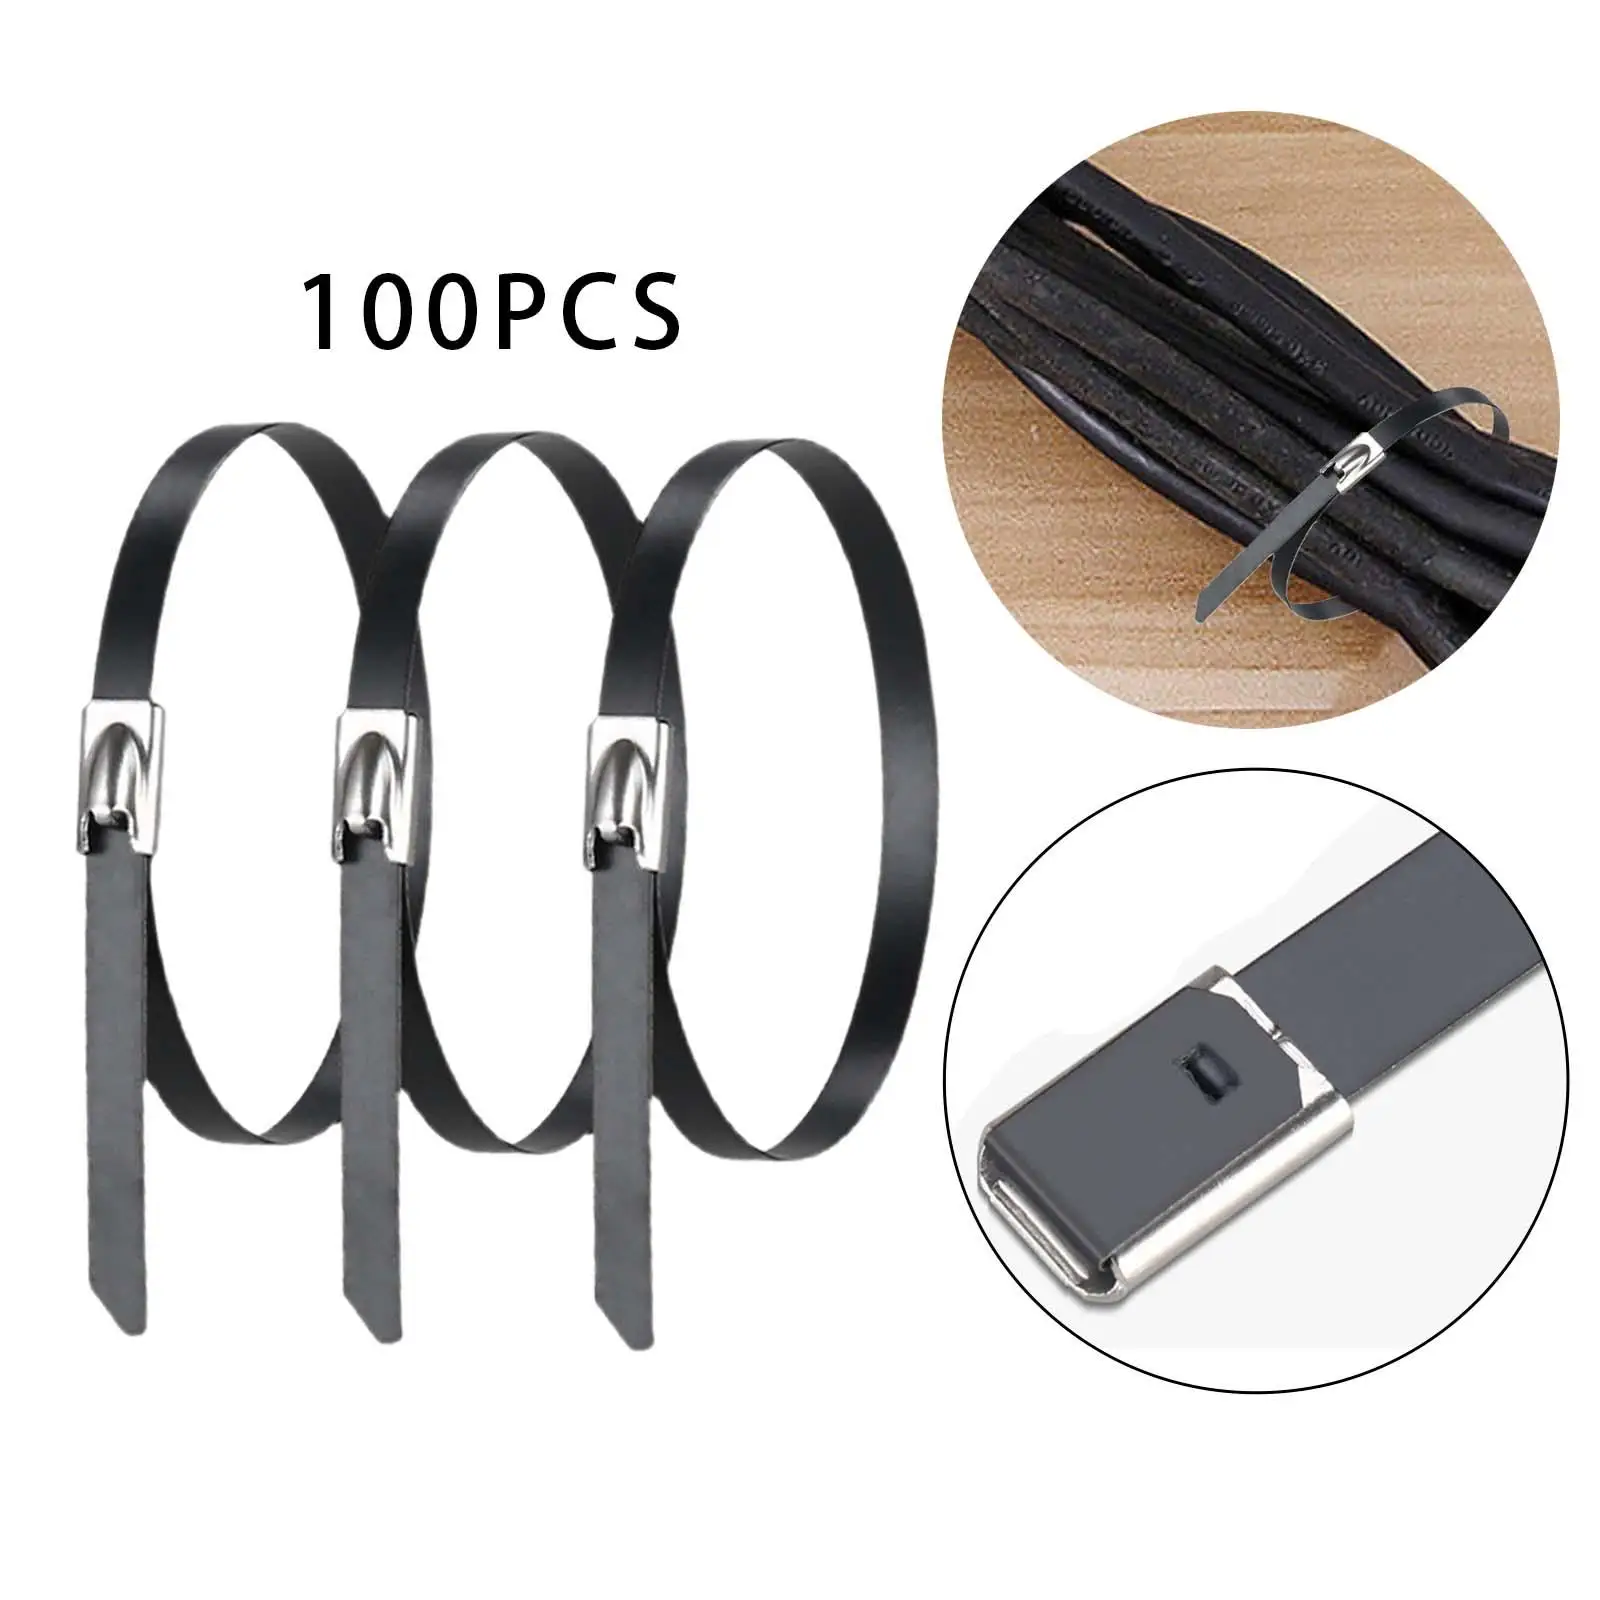 100Pcs 304 Stainless Steel Cable Ties Wrap Coated Practical Sturdy Accessory 4.6mm Width Black Color Versatile for Wire Harness